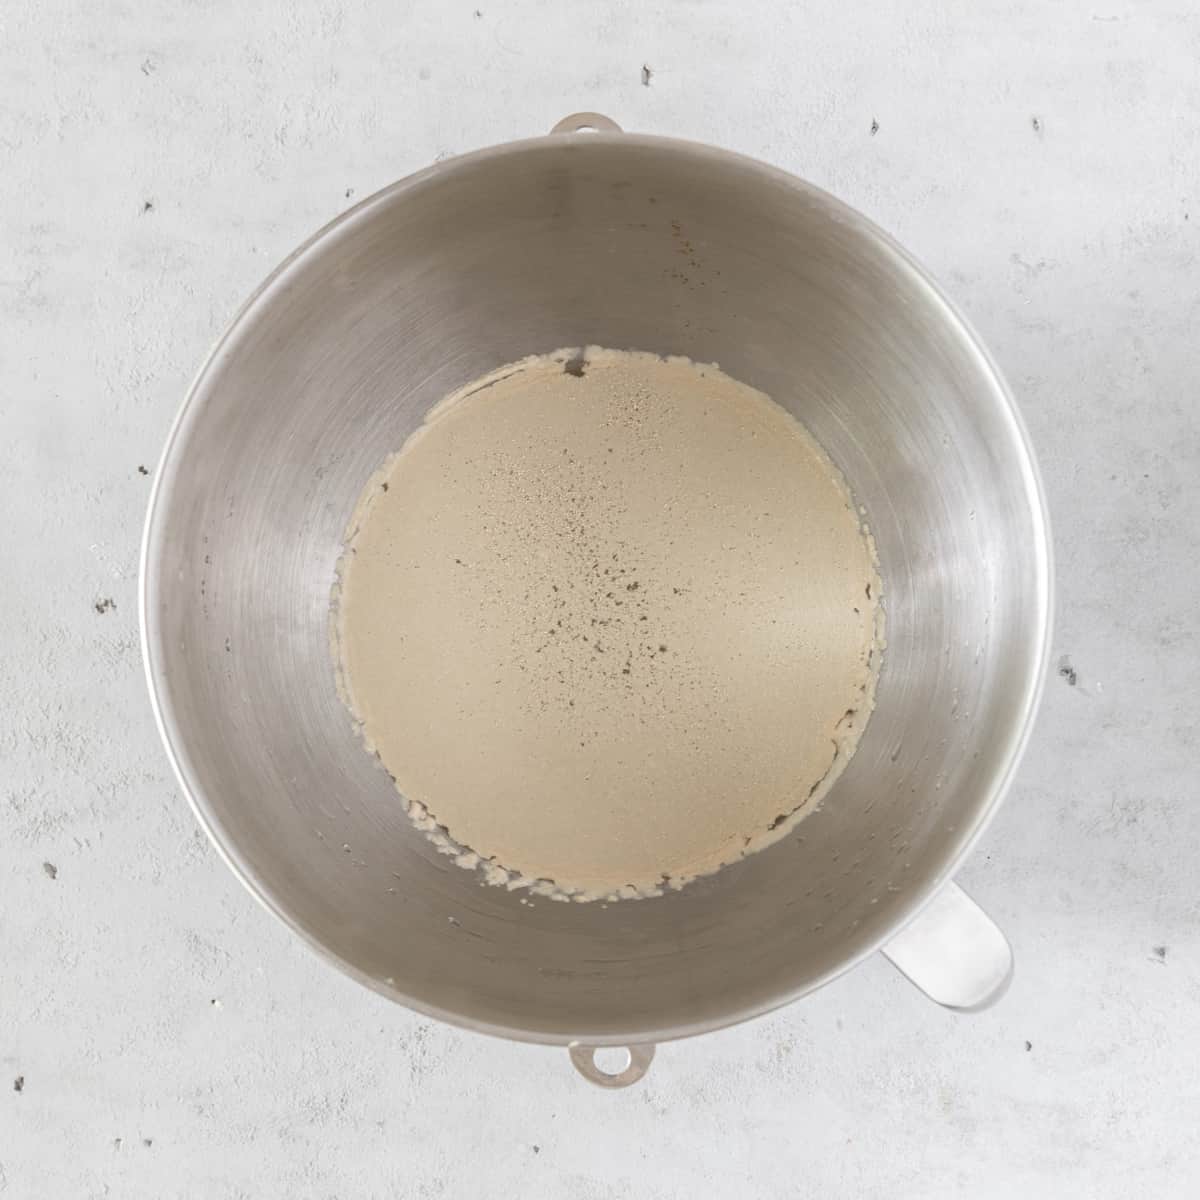 the water and instant yeast combined in a metal mixing bowl on a grey background.